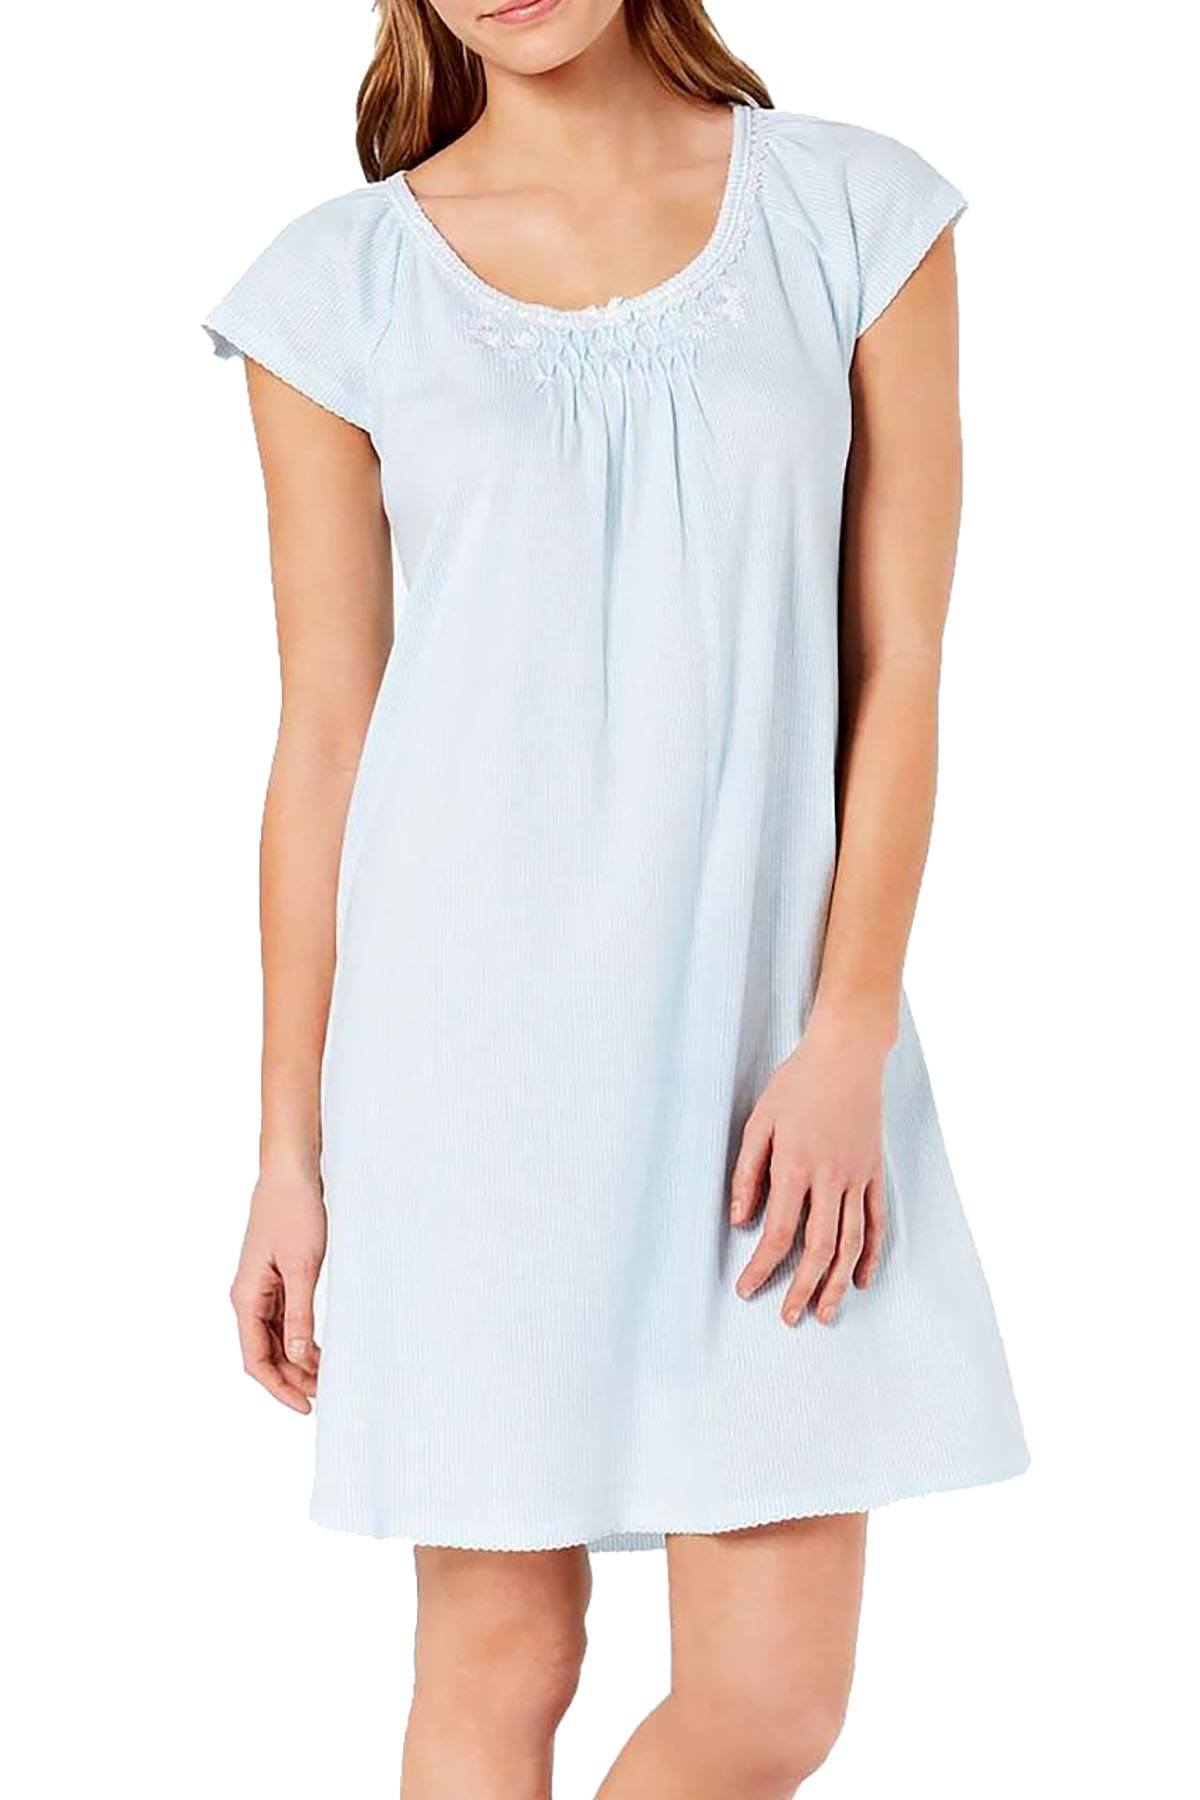 Miss Elaine Cottonessa Embroidered Knit Nightgown in Turquoise Stripe